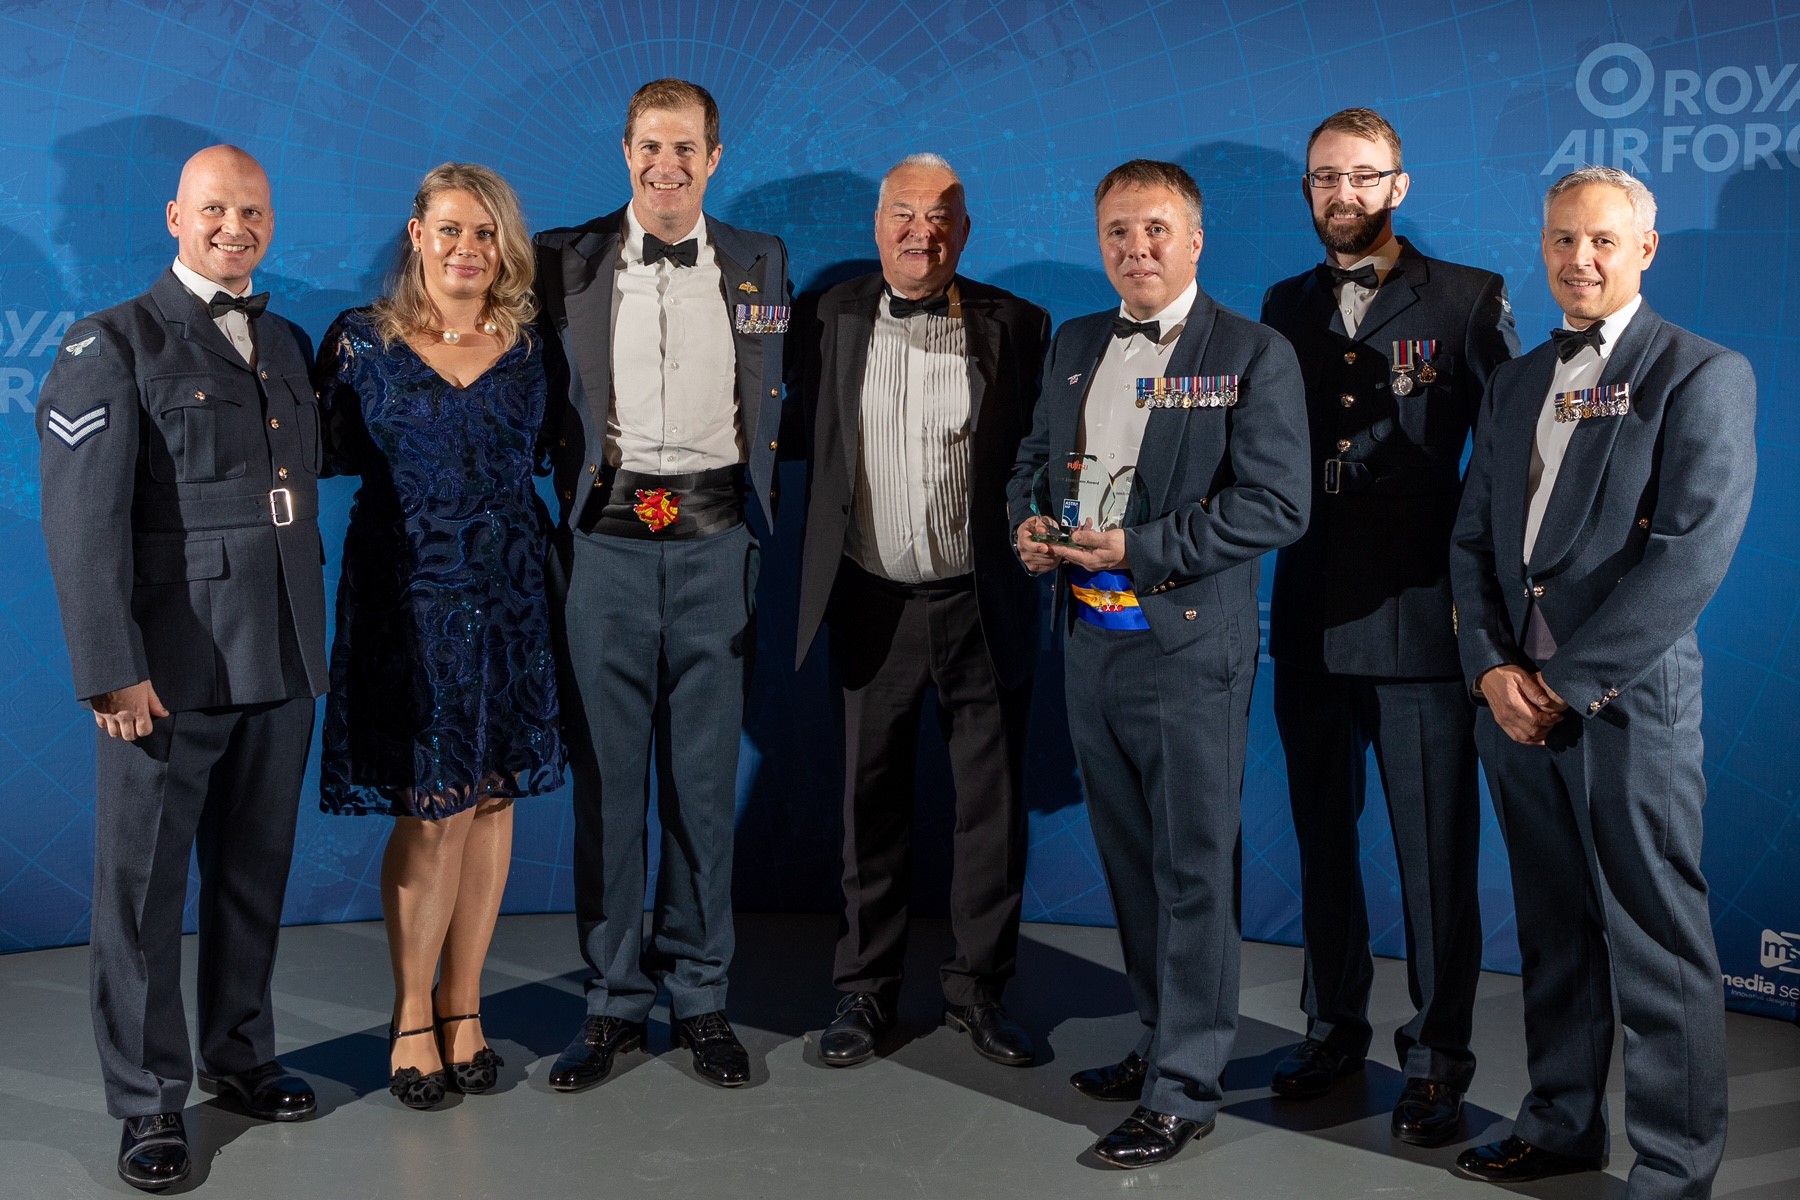 Image shows RAF aviators posing for picture at awards ceremony.